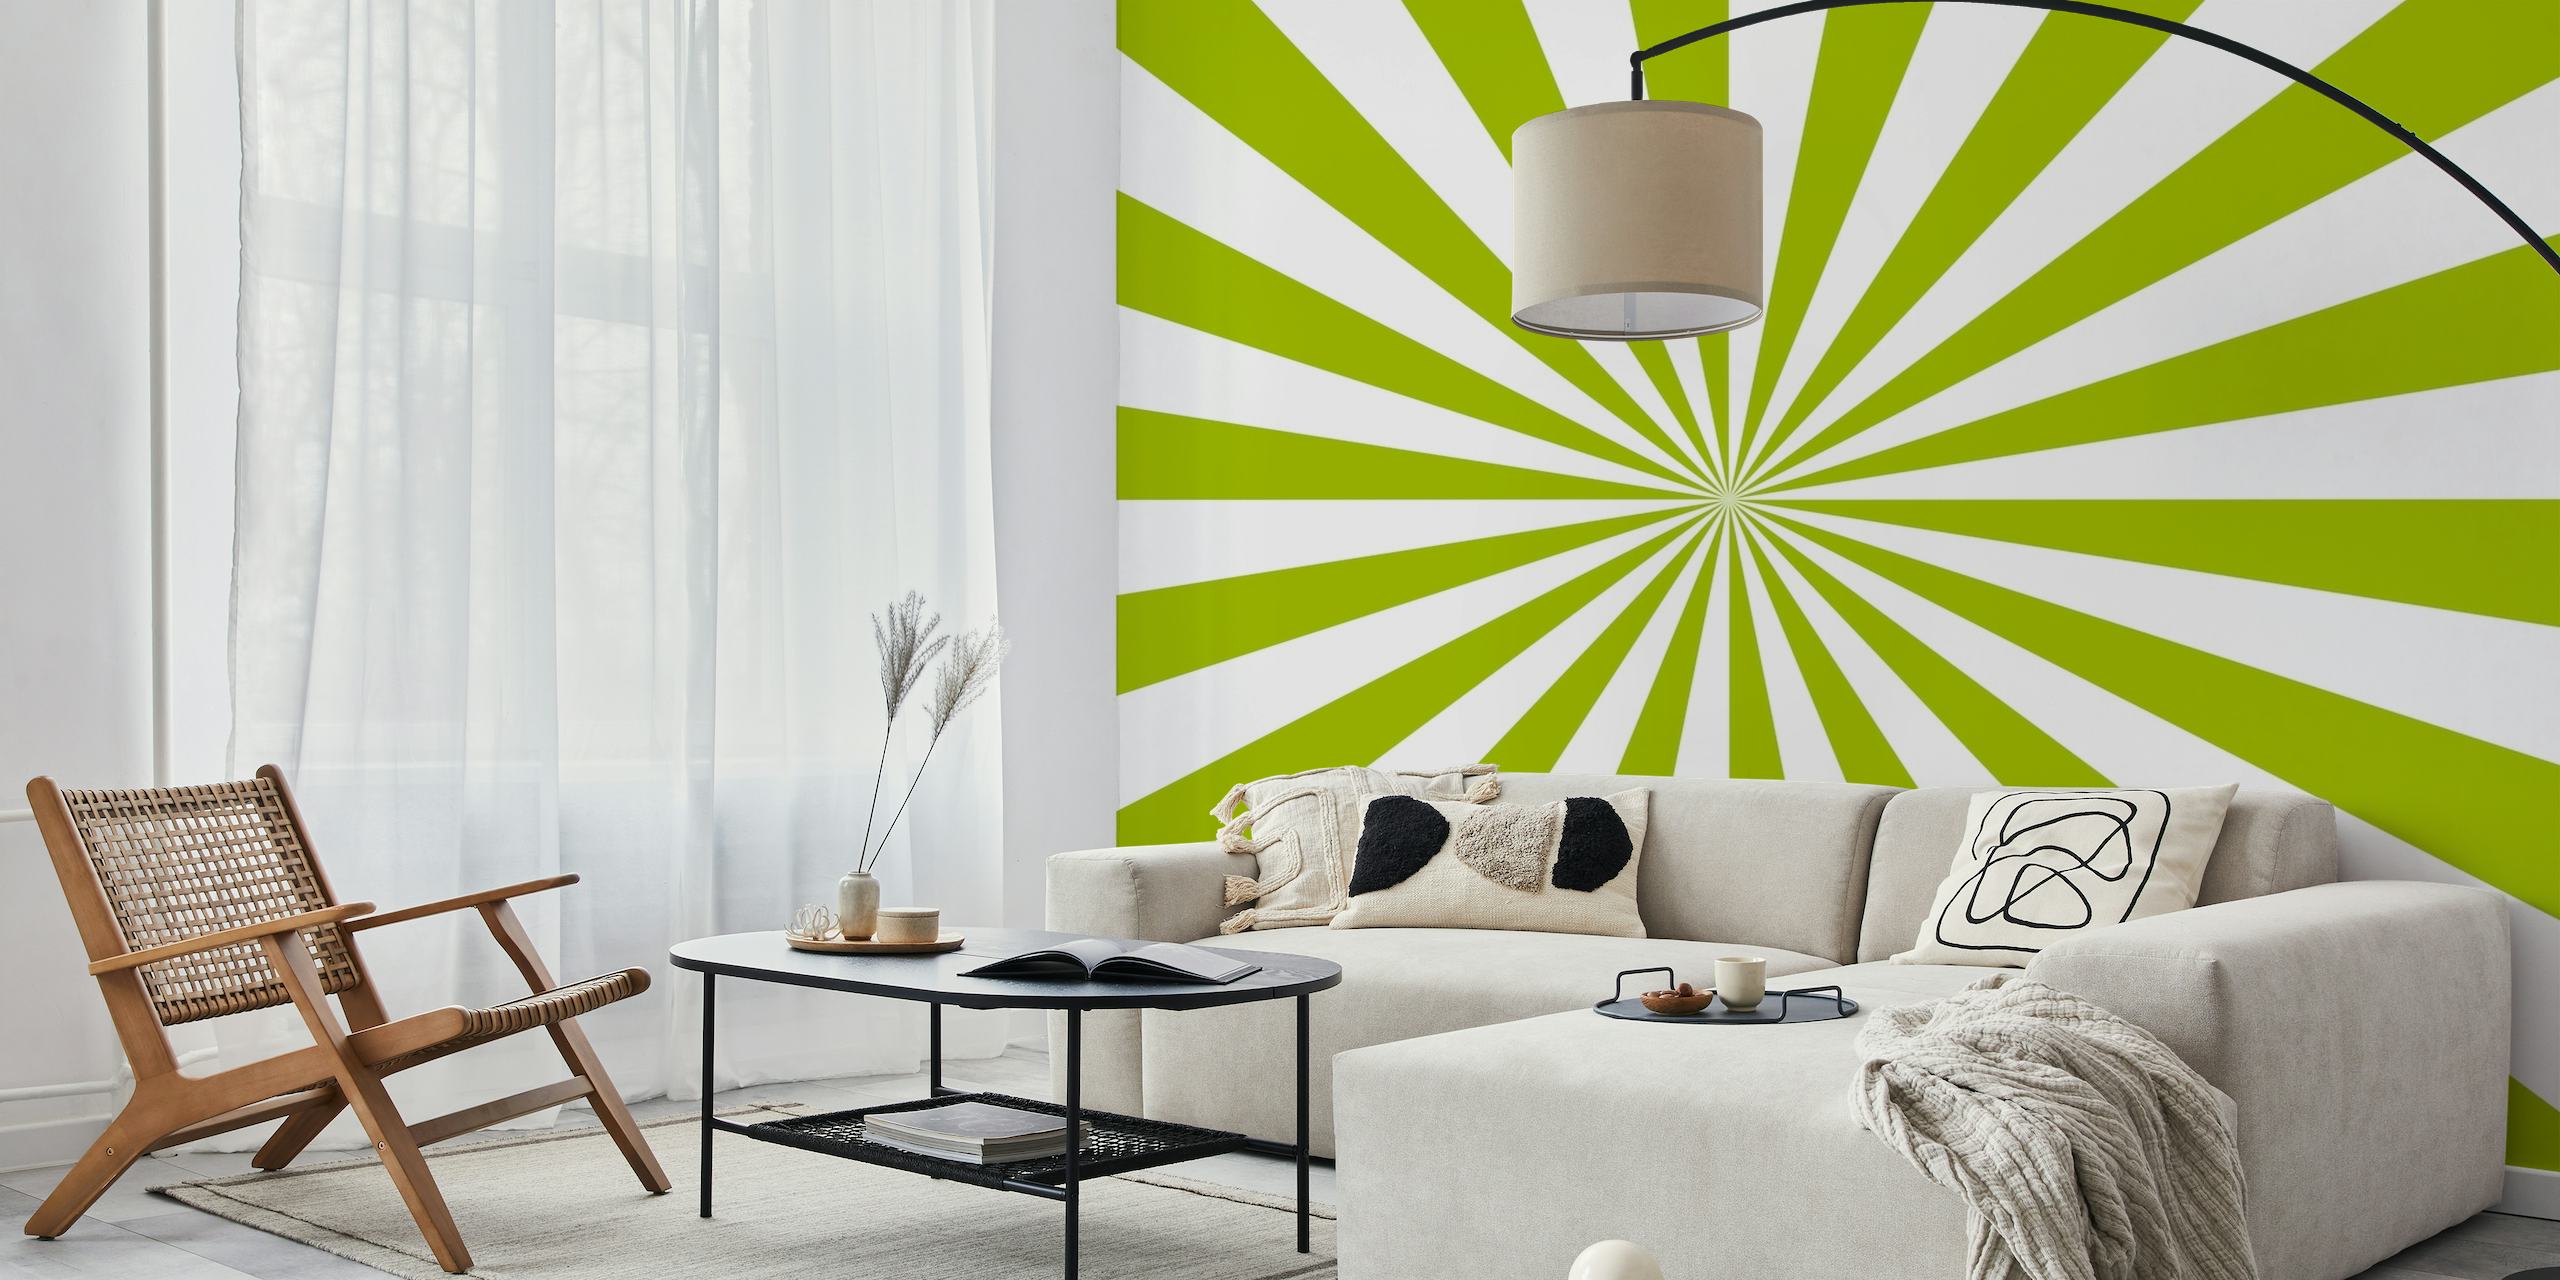 Green and white retro radiating pattern wall mural